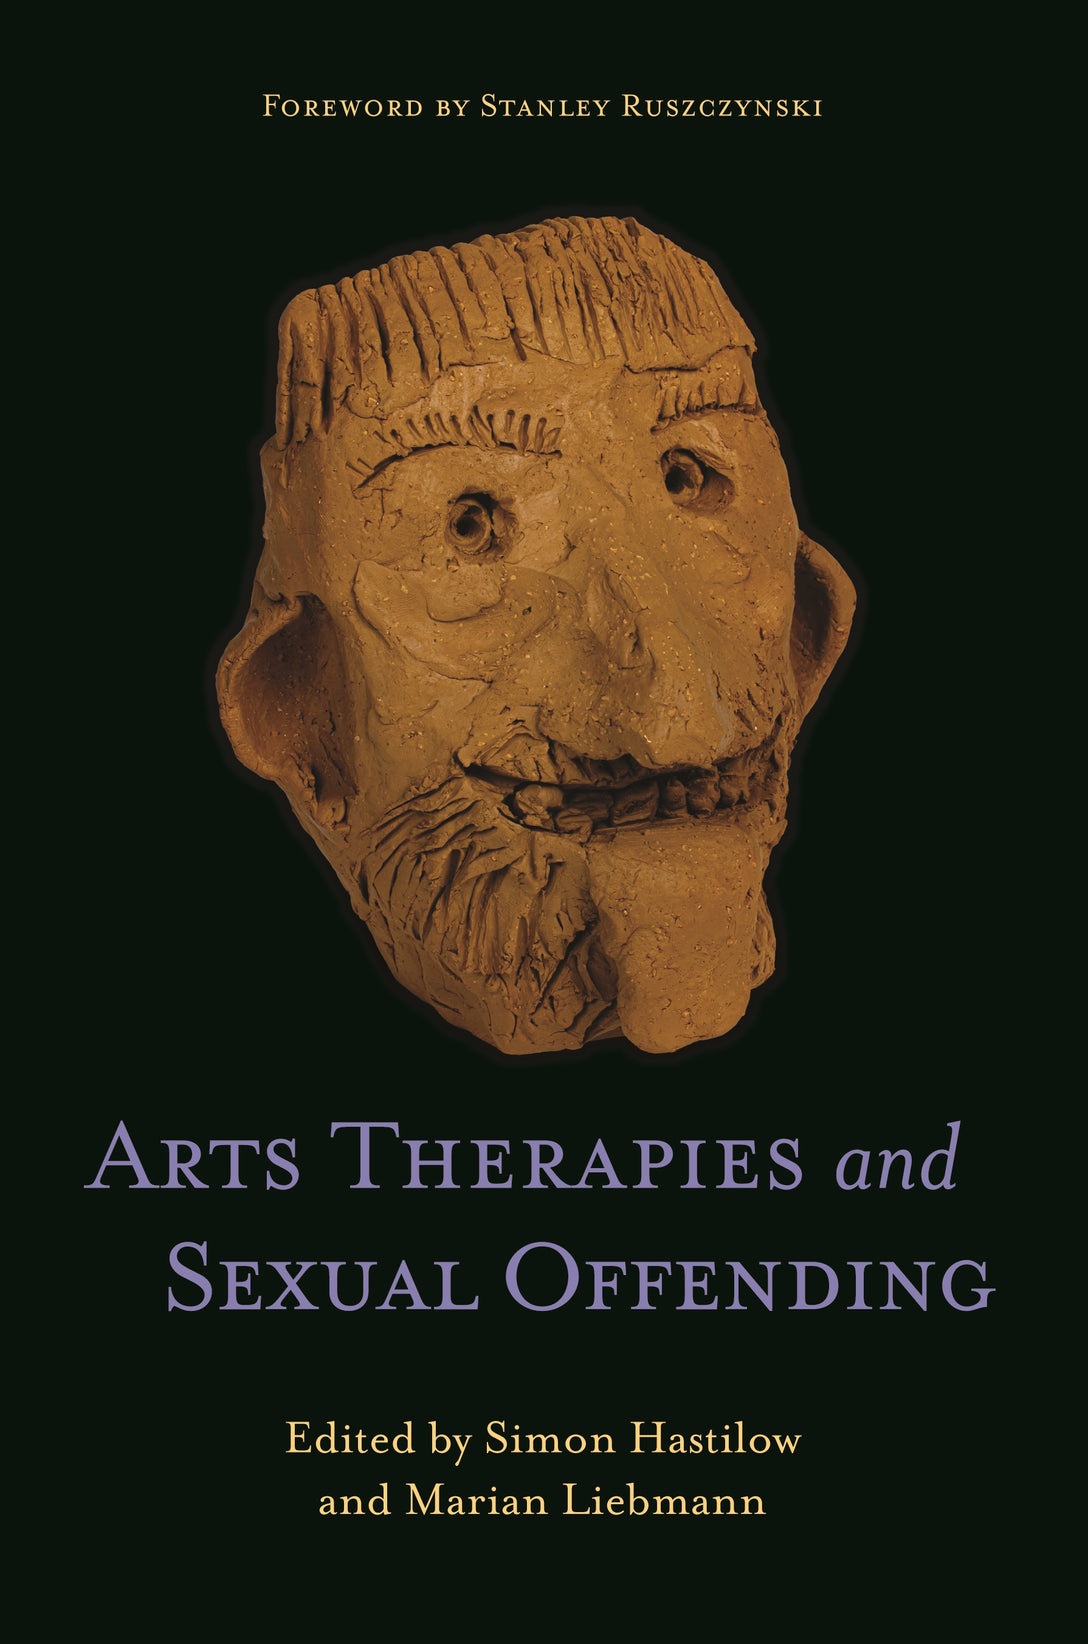 Arts Therapies and Sexual Offending by No Author Listed, Simon Hastilow, Marian Liebmann, Stanley Ruszczynski